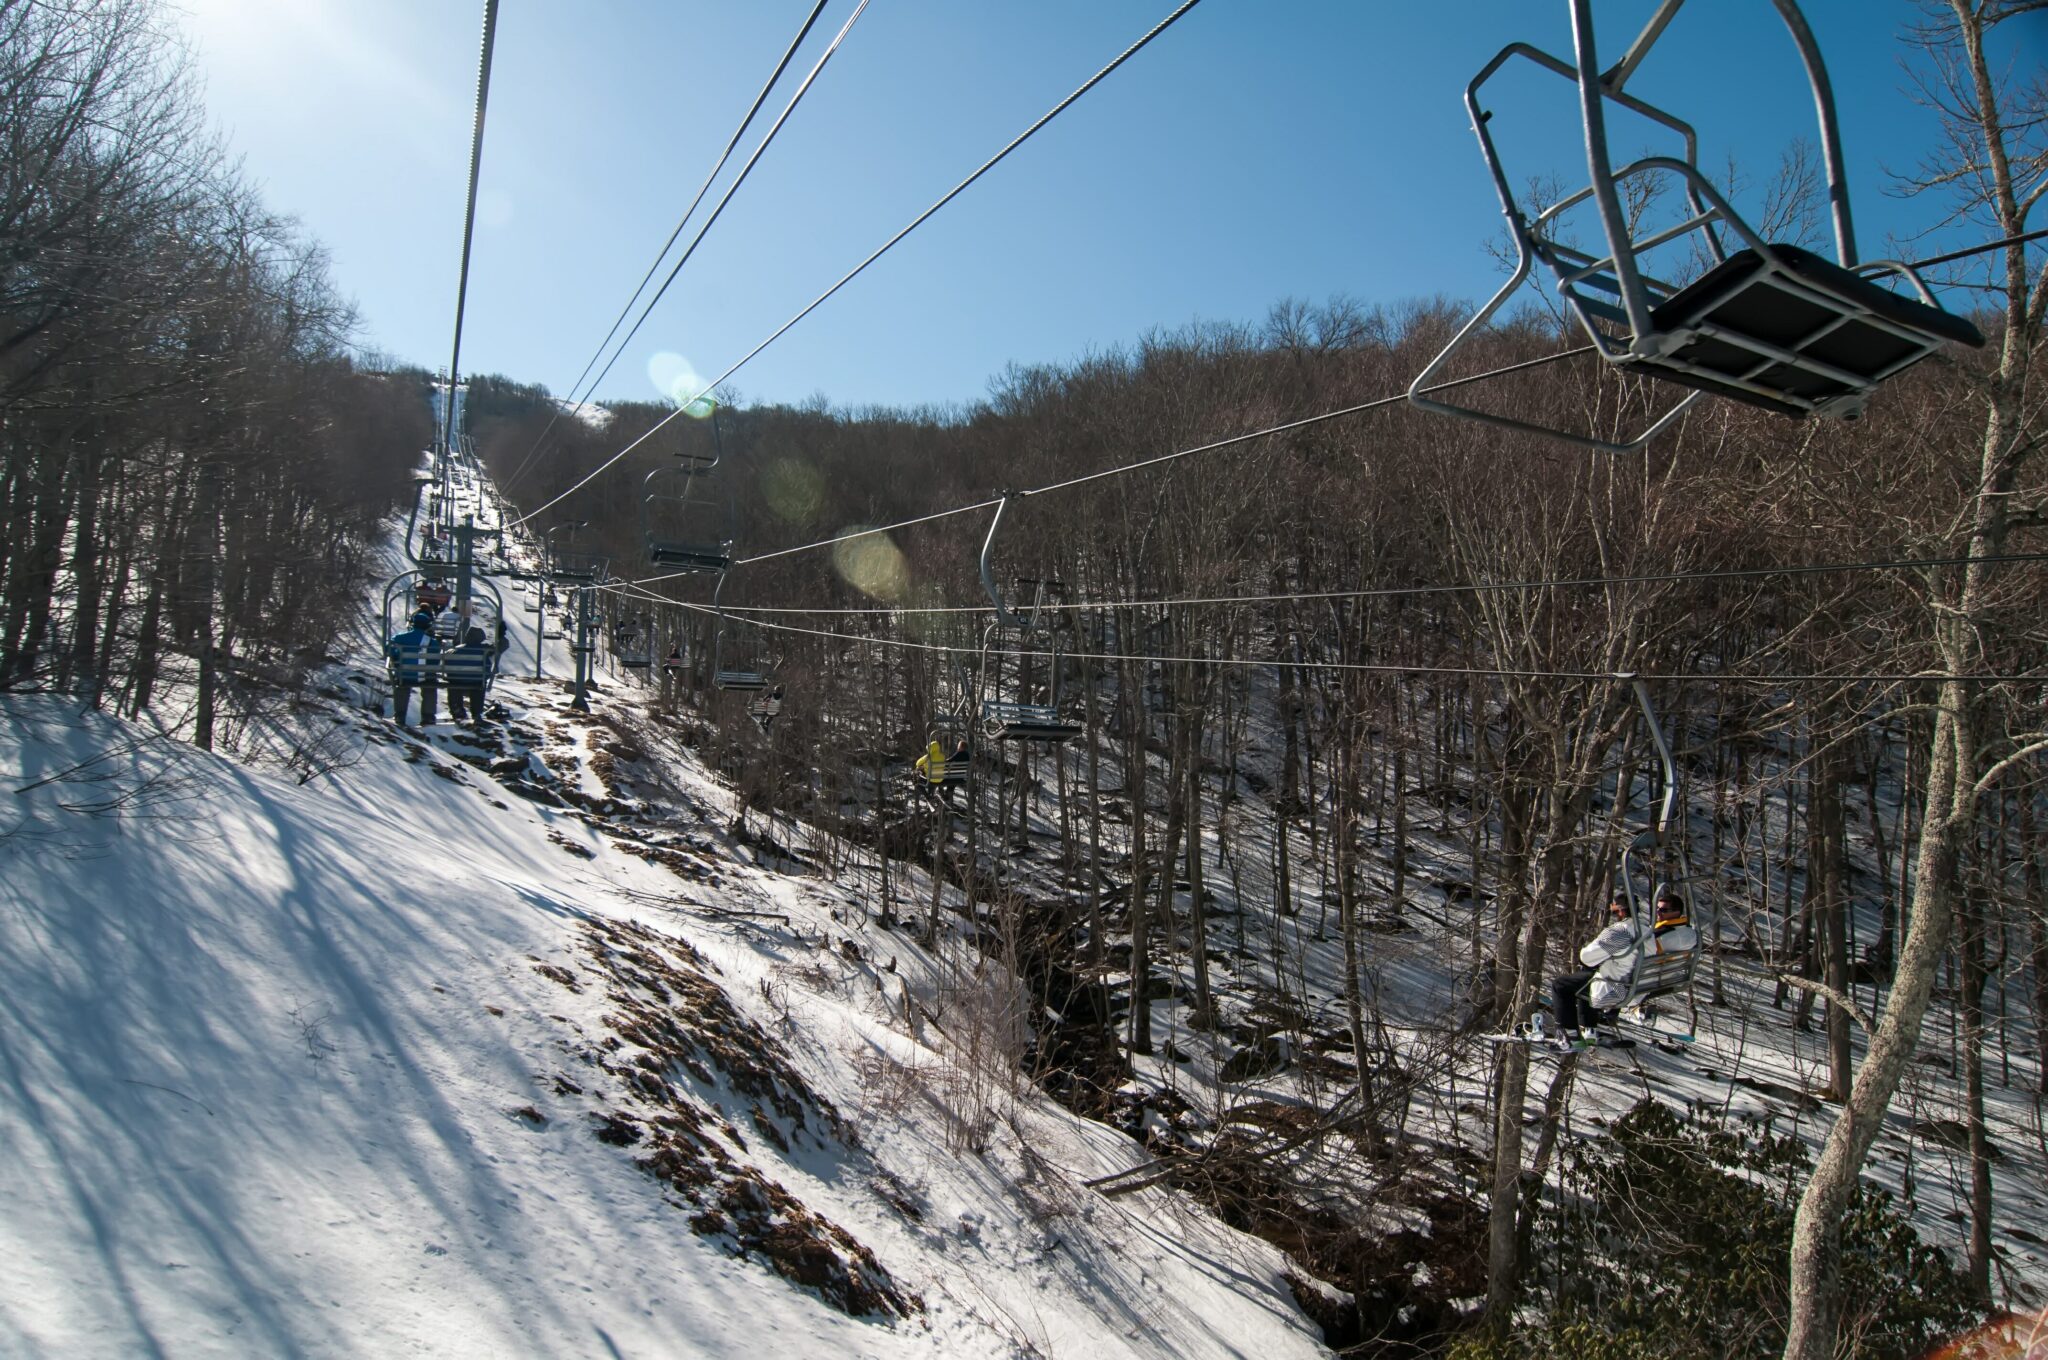 A chairlift gracefully ascends a picturesque mountain, providing access to thrilling ski slopes amid a winter wonderland